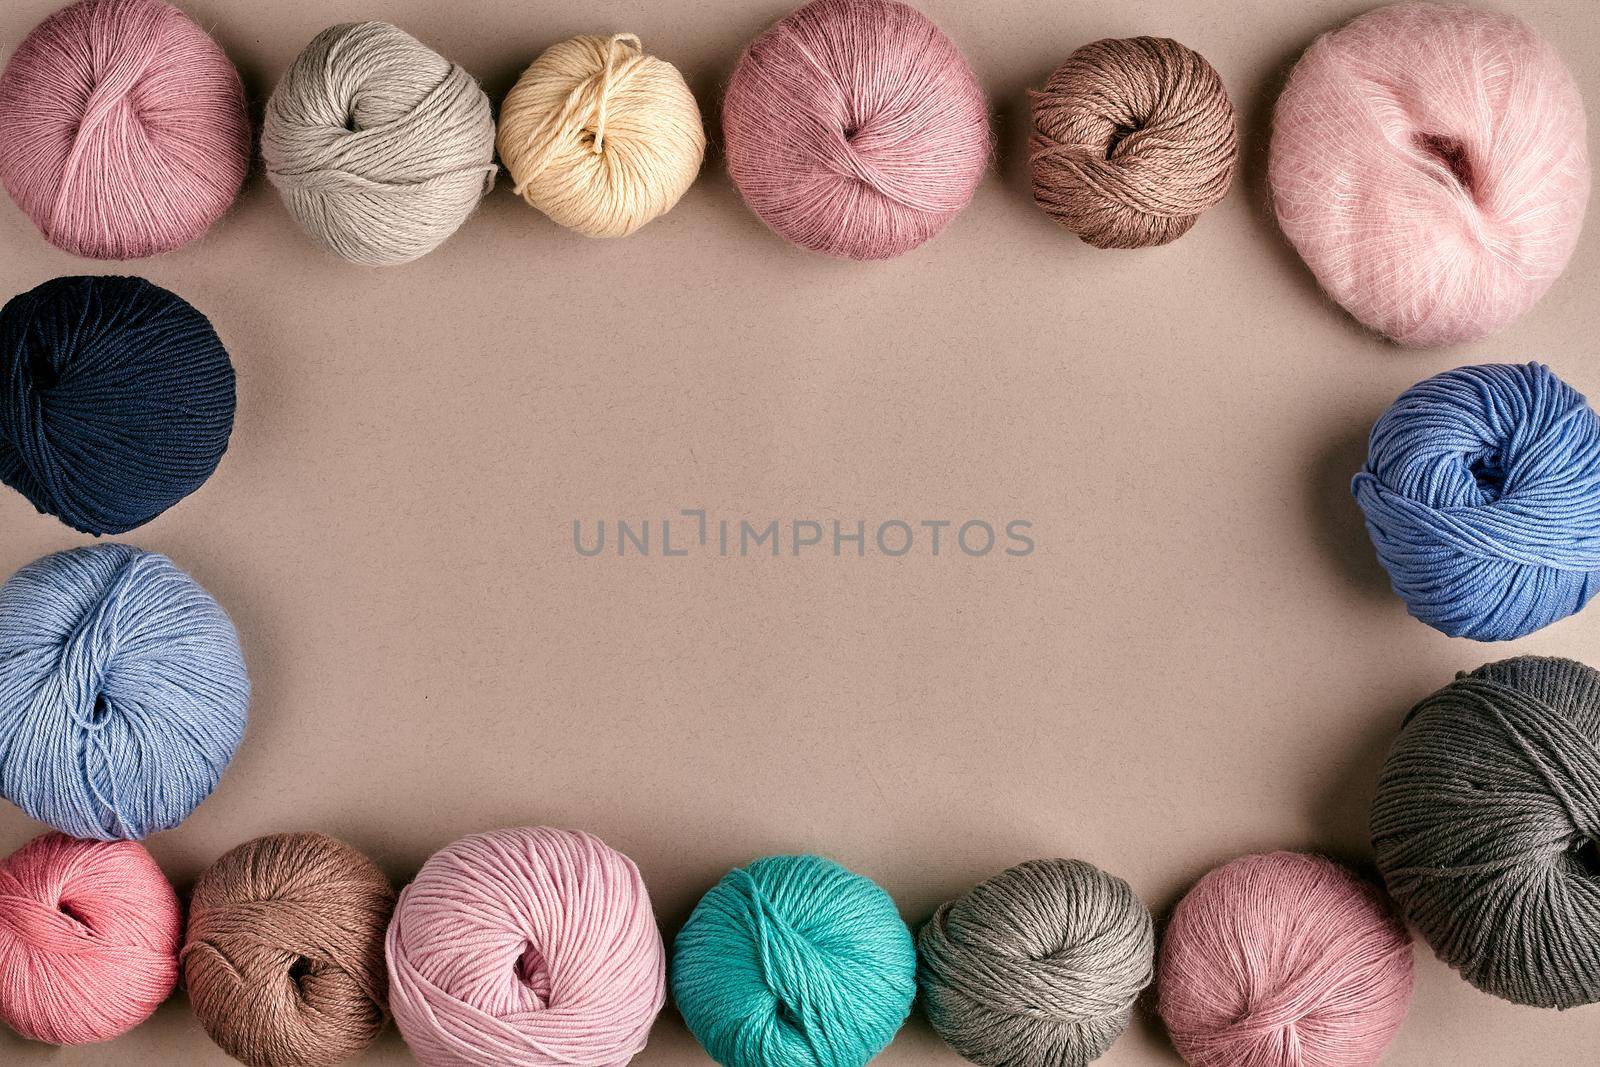 Set of colorful wool yarn on beige background. Knitting as a kind of needlework. Colorful balls of yarn and knitting needles. Top view. Still life. Copy space. Flat lay. Frame of tangles of knitting threads